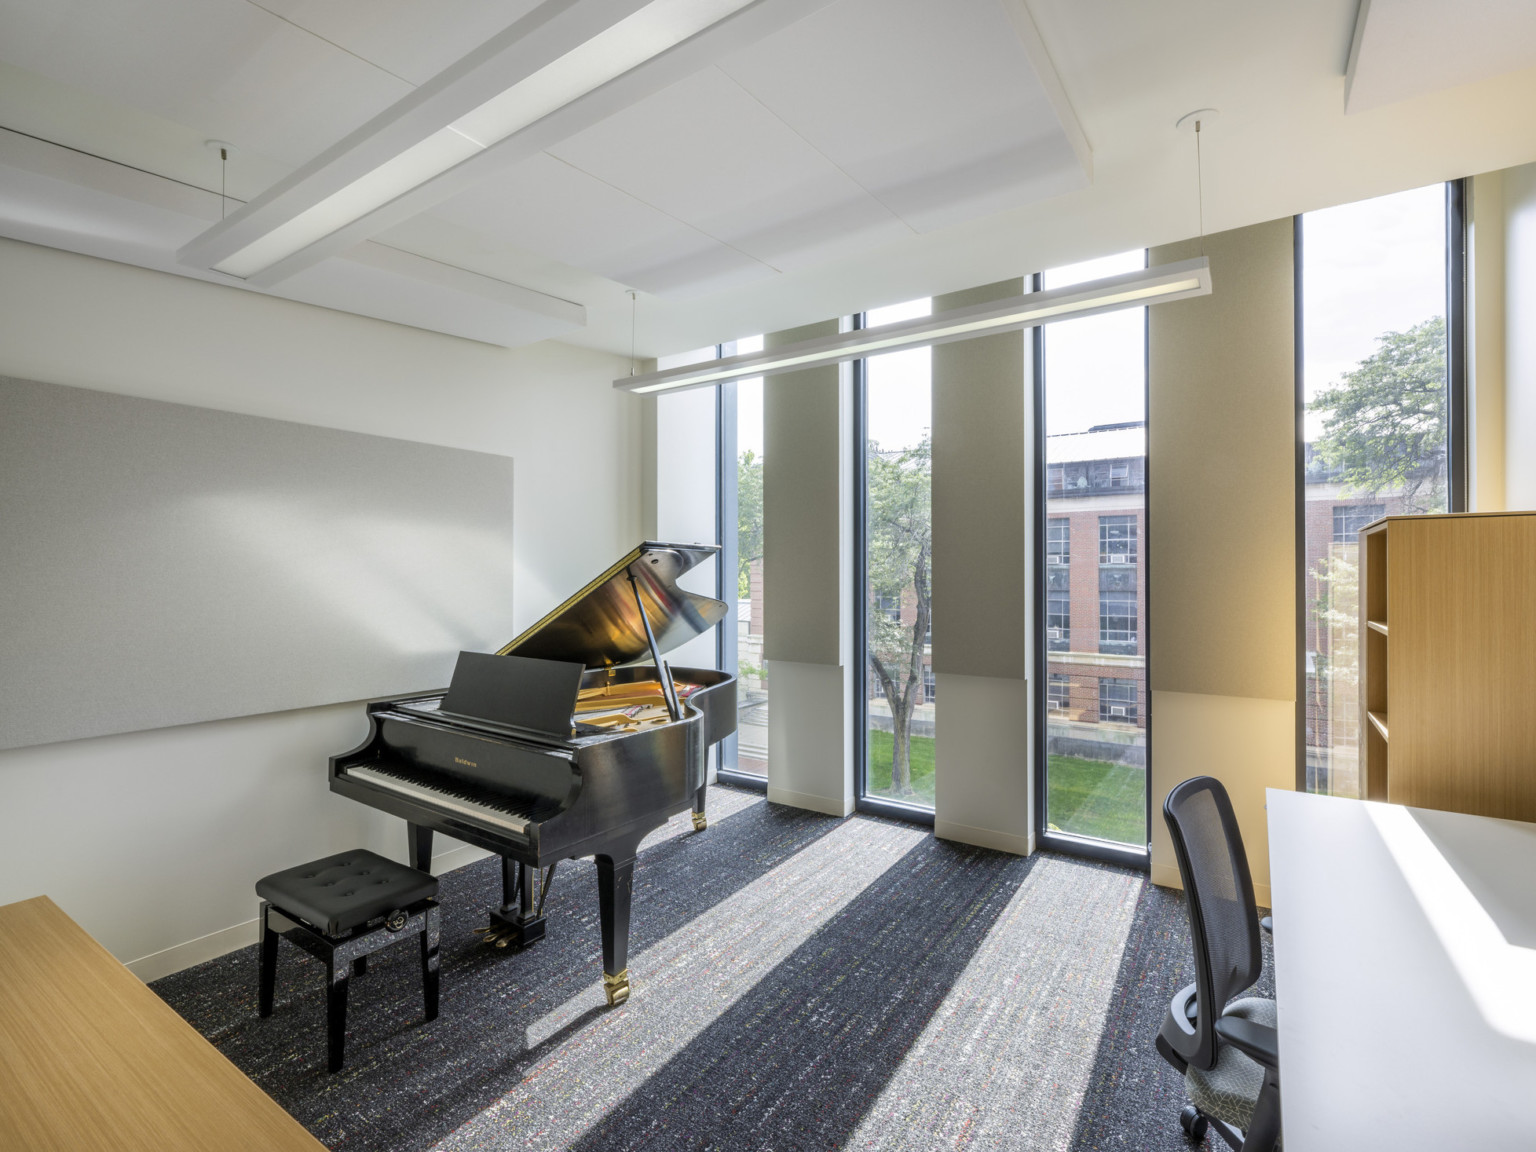 Private piano practice space with desk and panels of floor to ceiling windows on upper floor looking down to courtyard with natural light